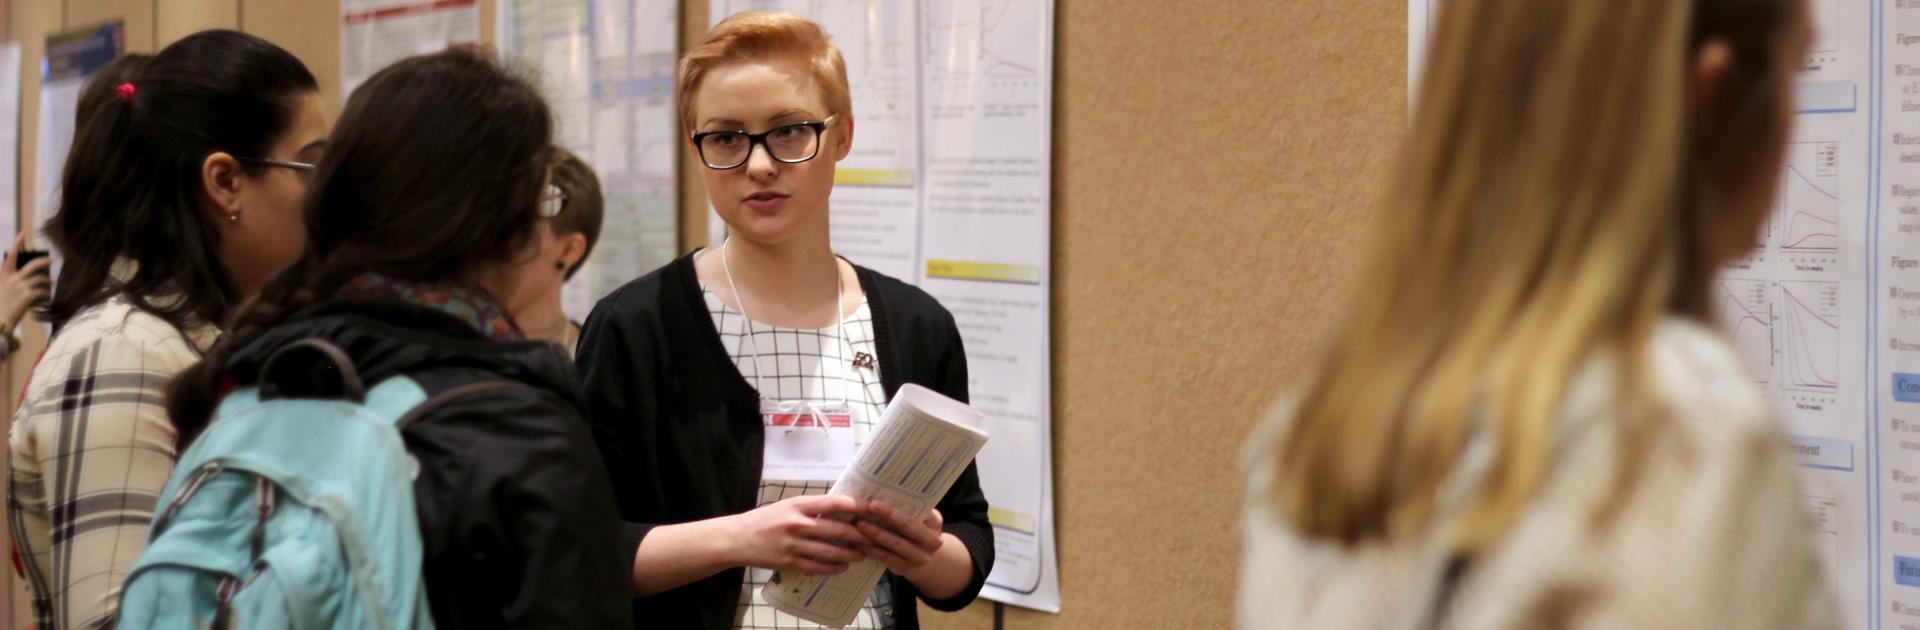 A conference presenter at the NCUWM poster session